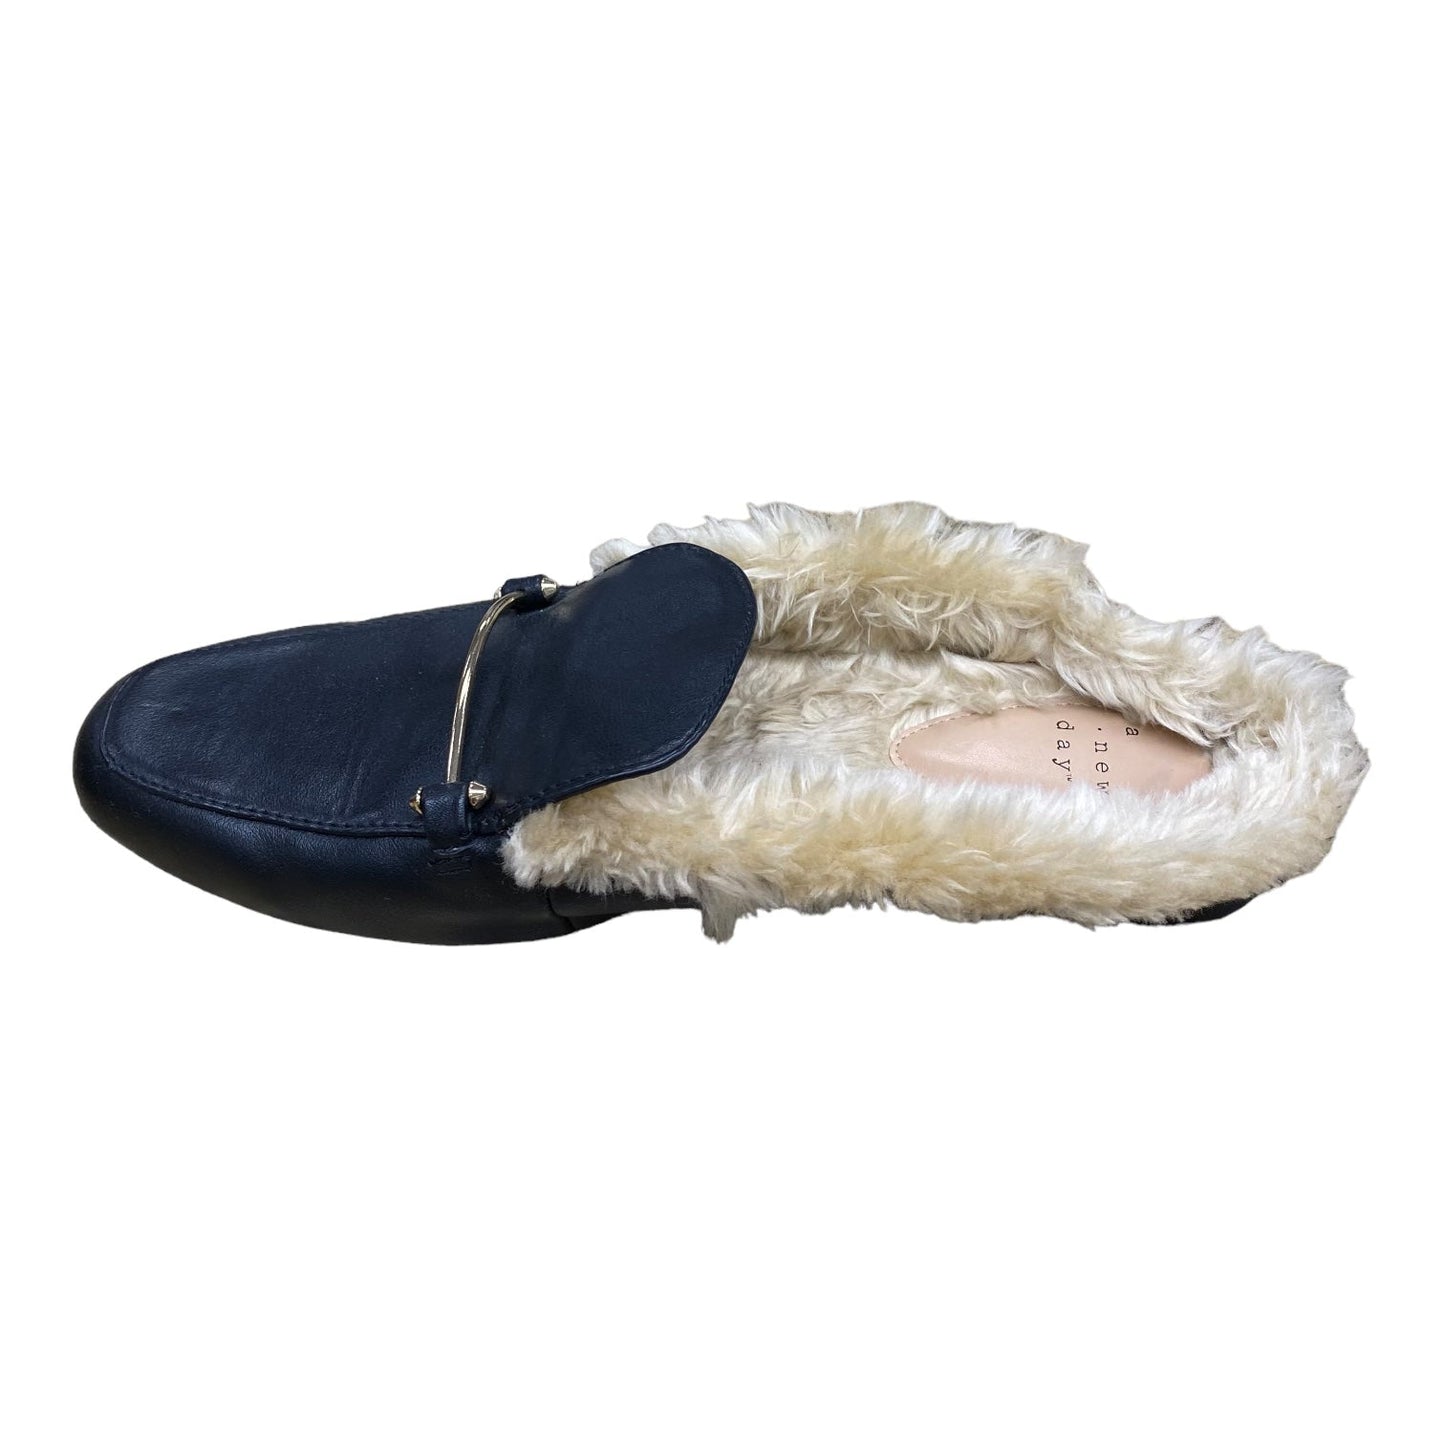 Shoes Flats Mule & Slide By A New Day  Size: 10